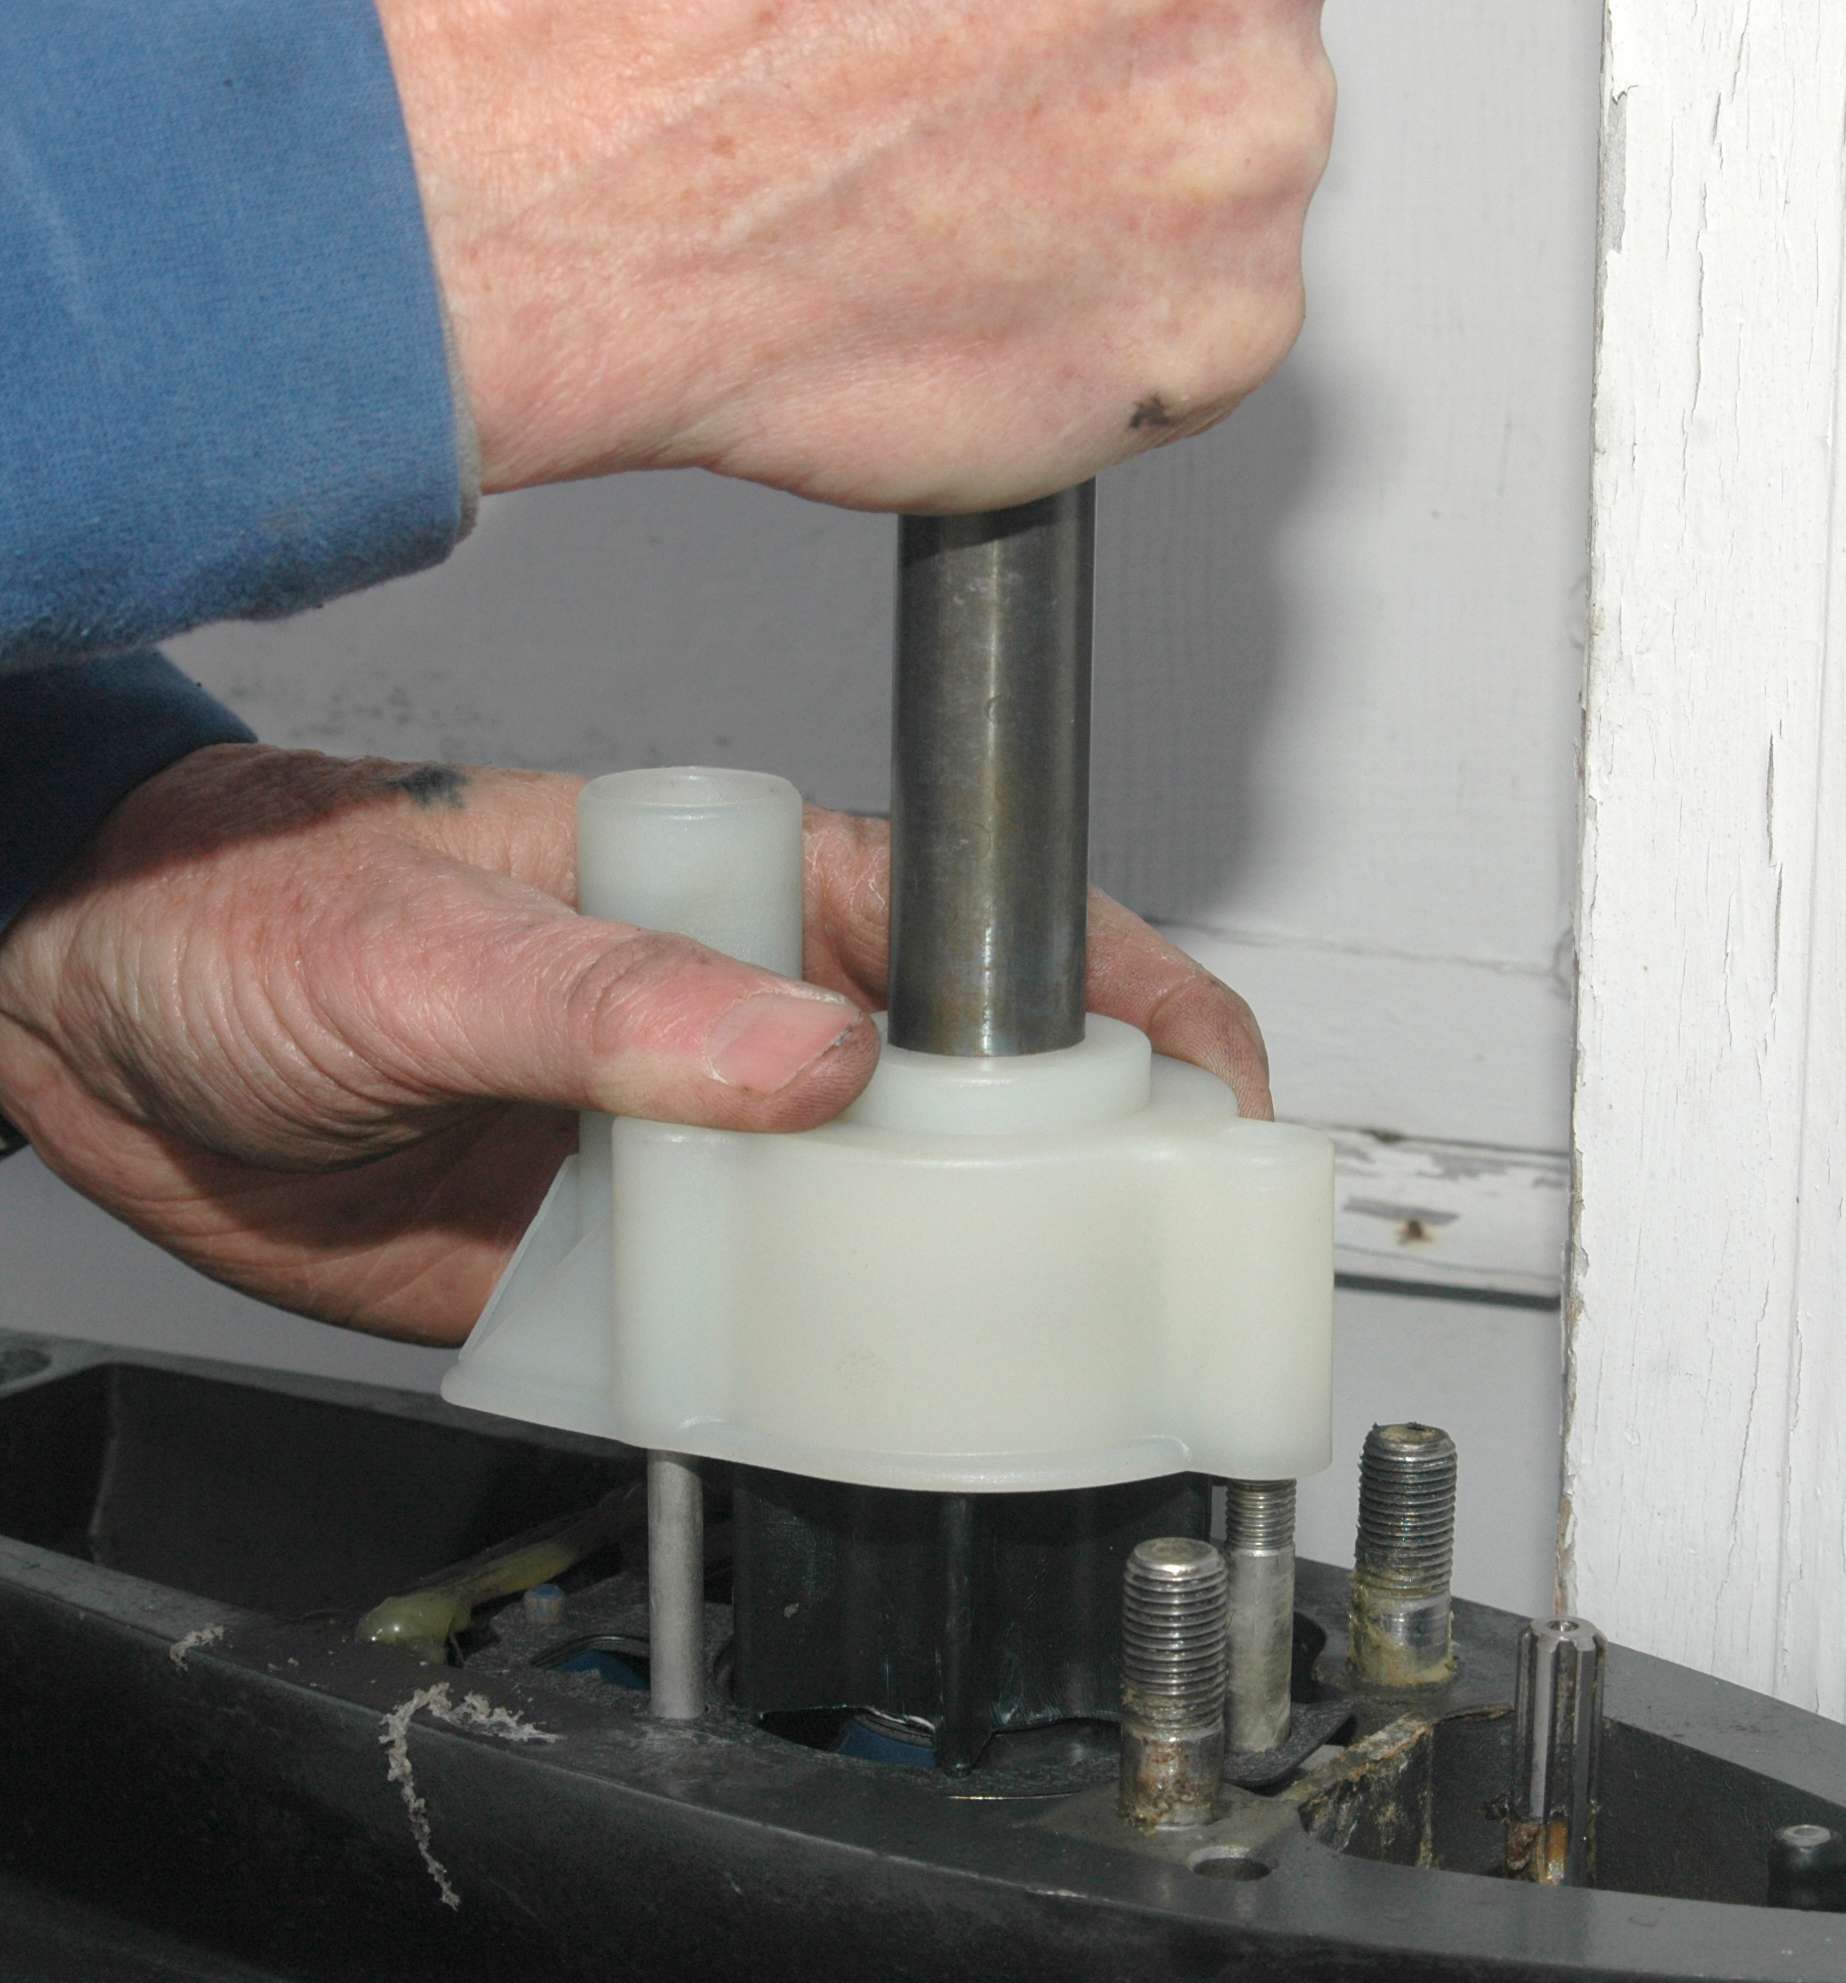 <em>REBUILDING THE WATER PUMP</em>
<br>Apply marine grease sparingly to the outside of the impeller and the inside of the water housing. Slide the impeller down the drive shaft and over its key. Then slide the water pressure housing down the shaft. Turn the shaft clockwise by hand while pressing down on the housing to bend the impellerâs arms into the housing.